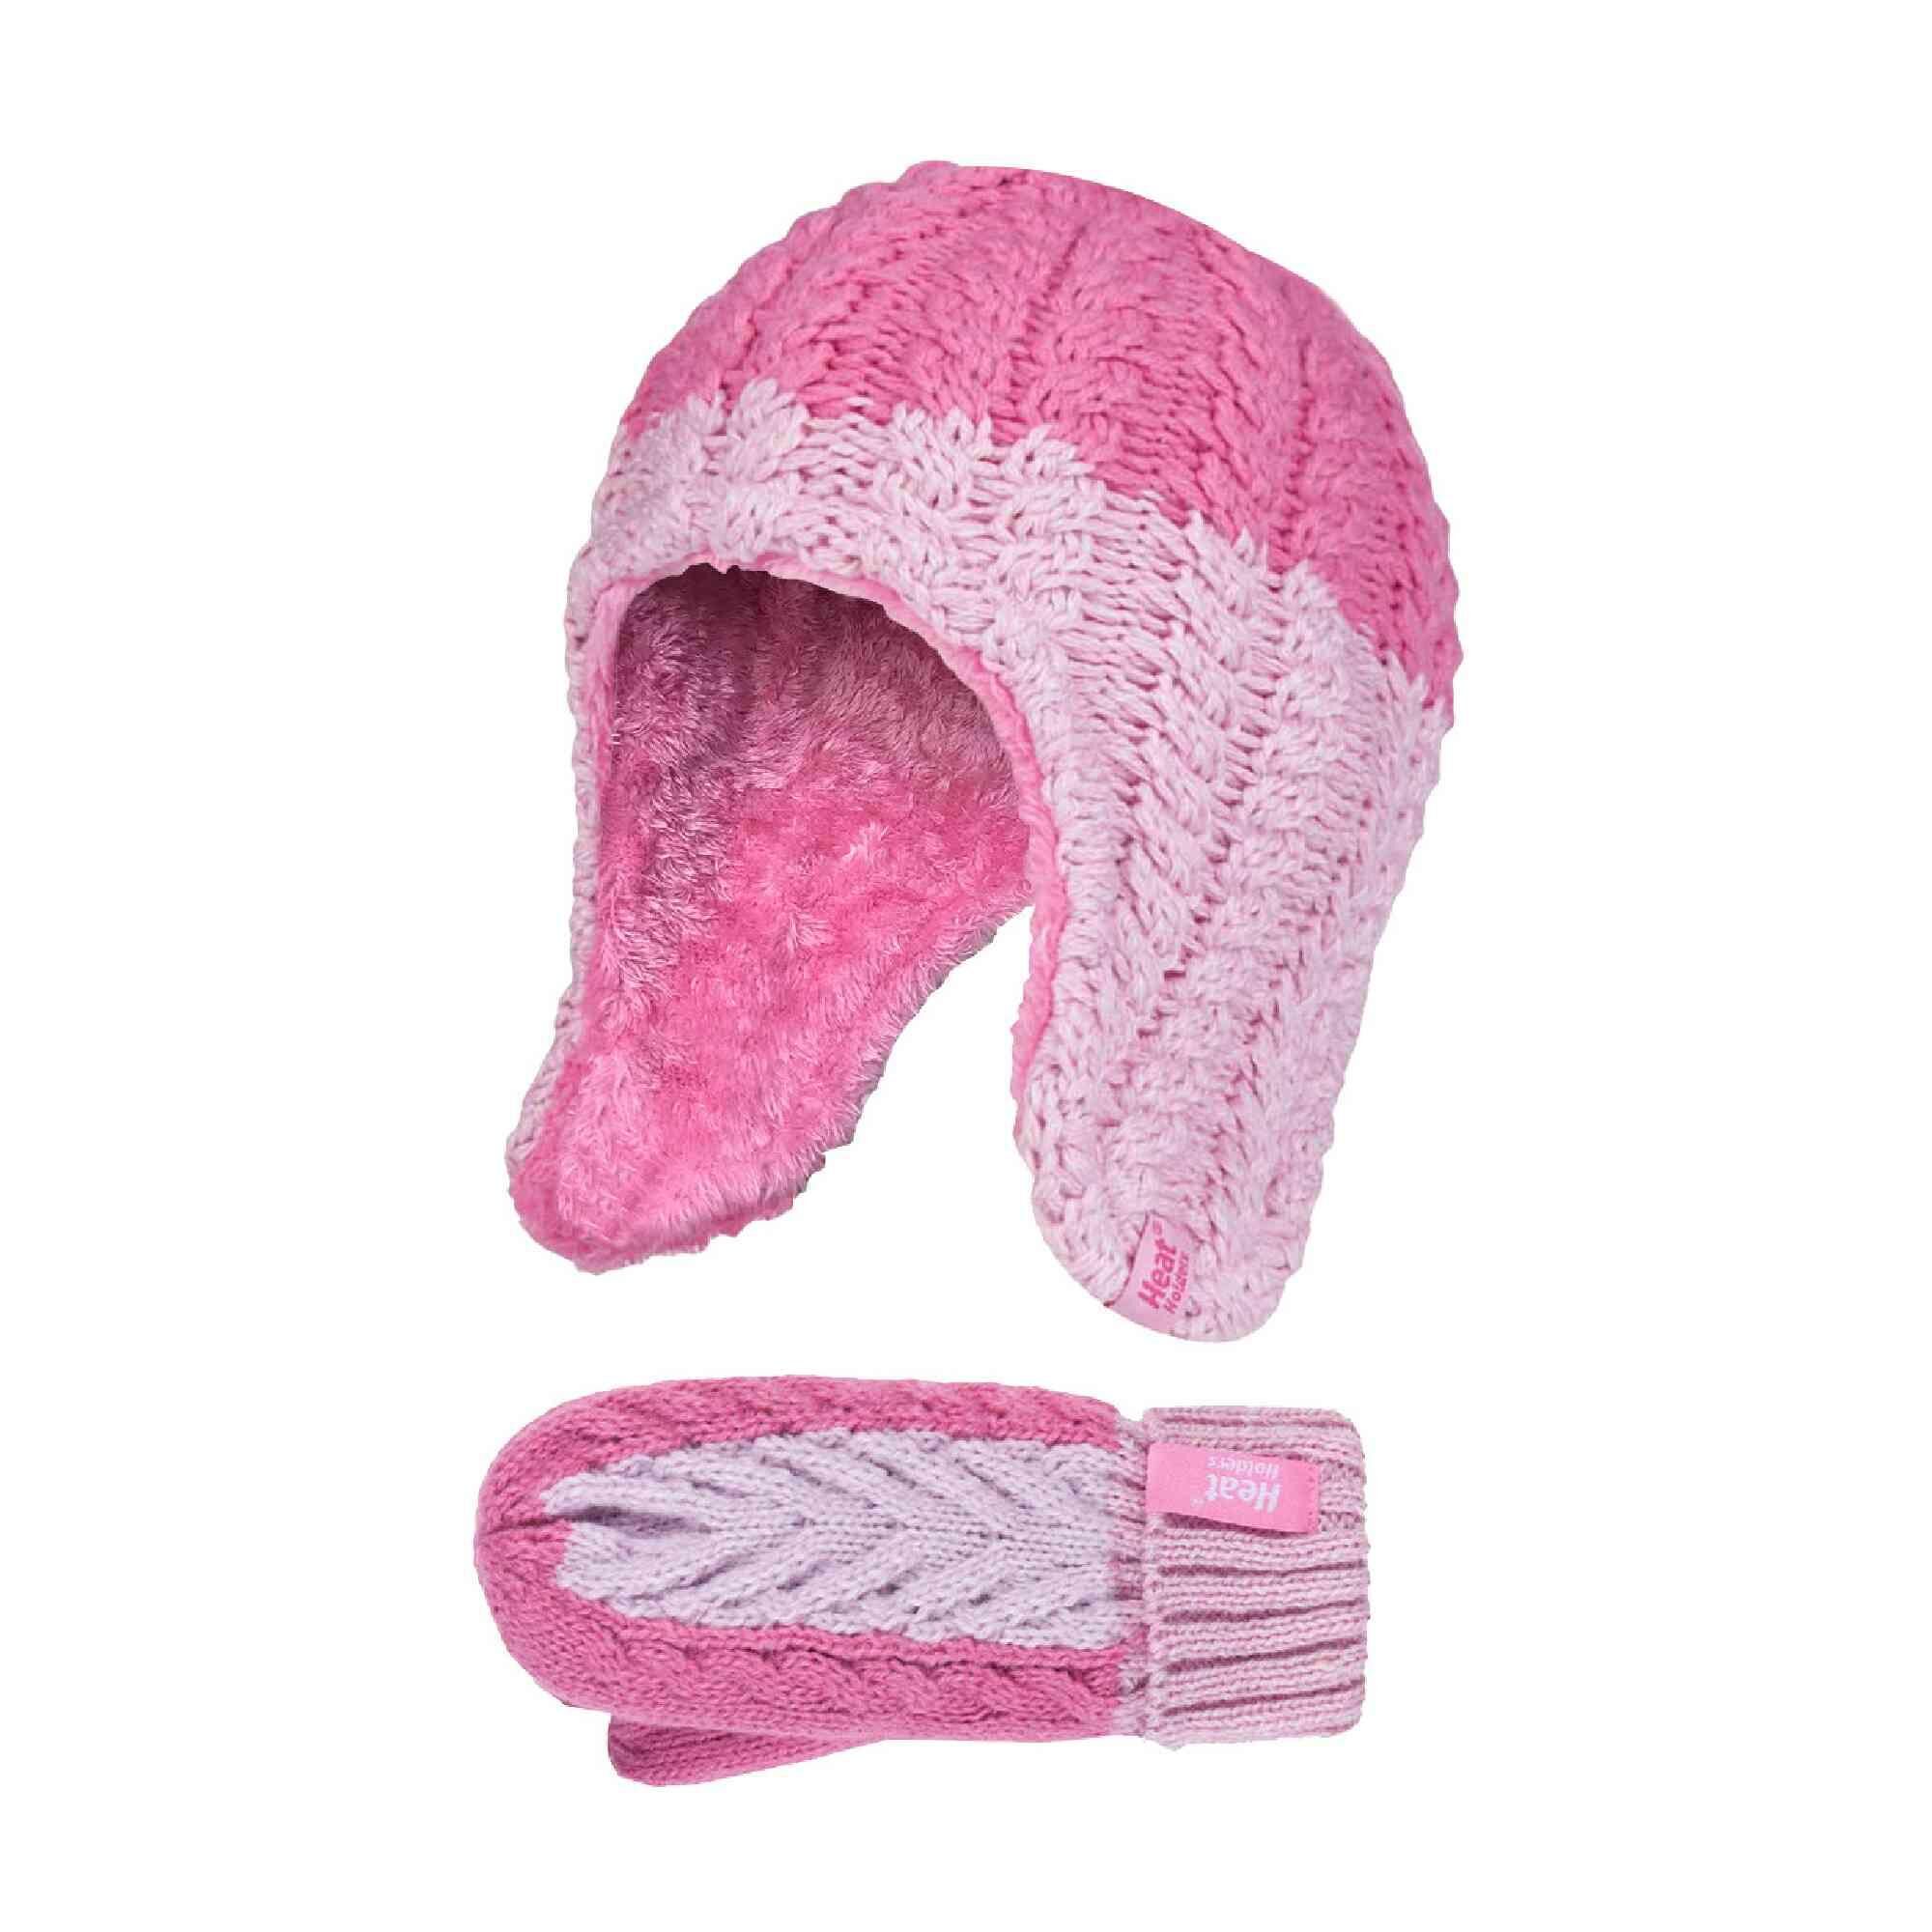 HEAT HOLDERS Kids Winter Warm Fleece Lined Thermal Beanie Hat and Mittens with Ear Flaps